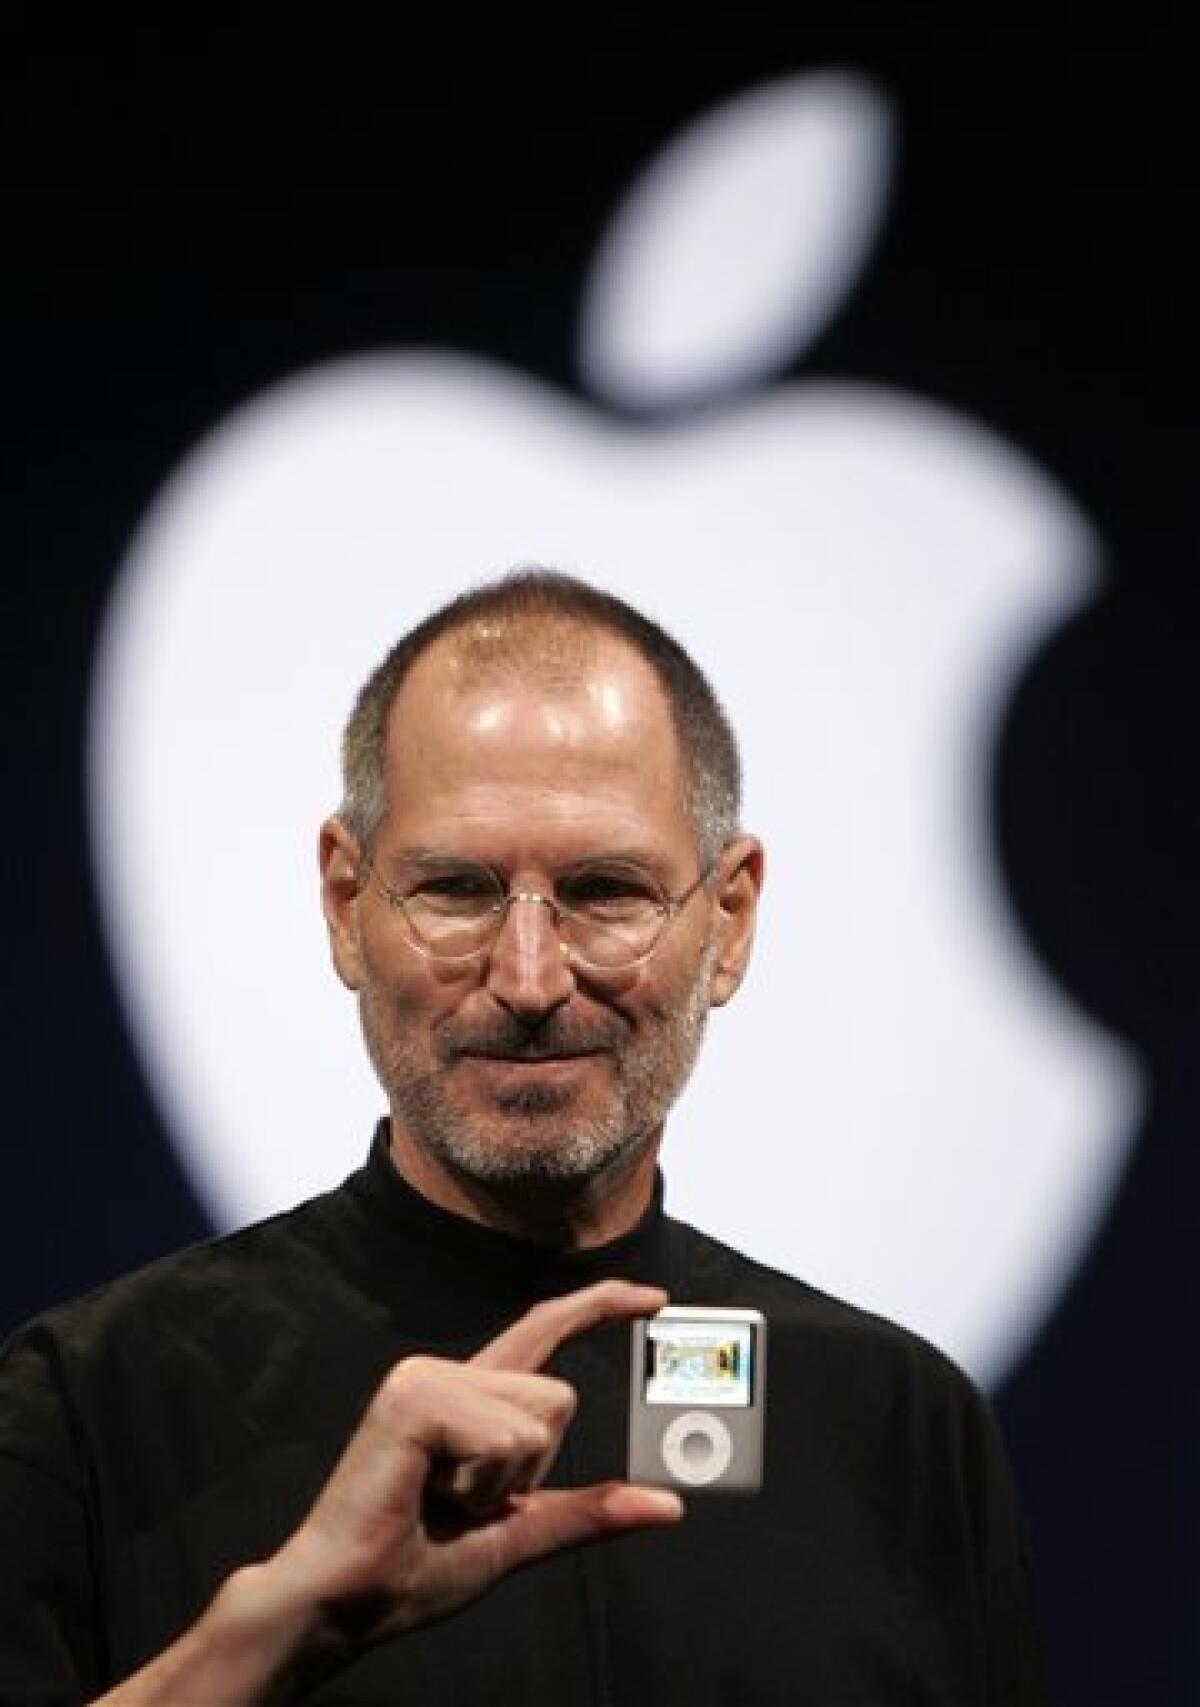 Key dates from the life and work of Steve Jobs - The San